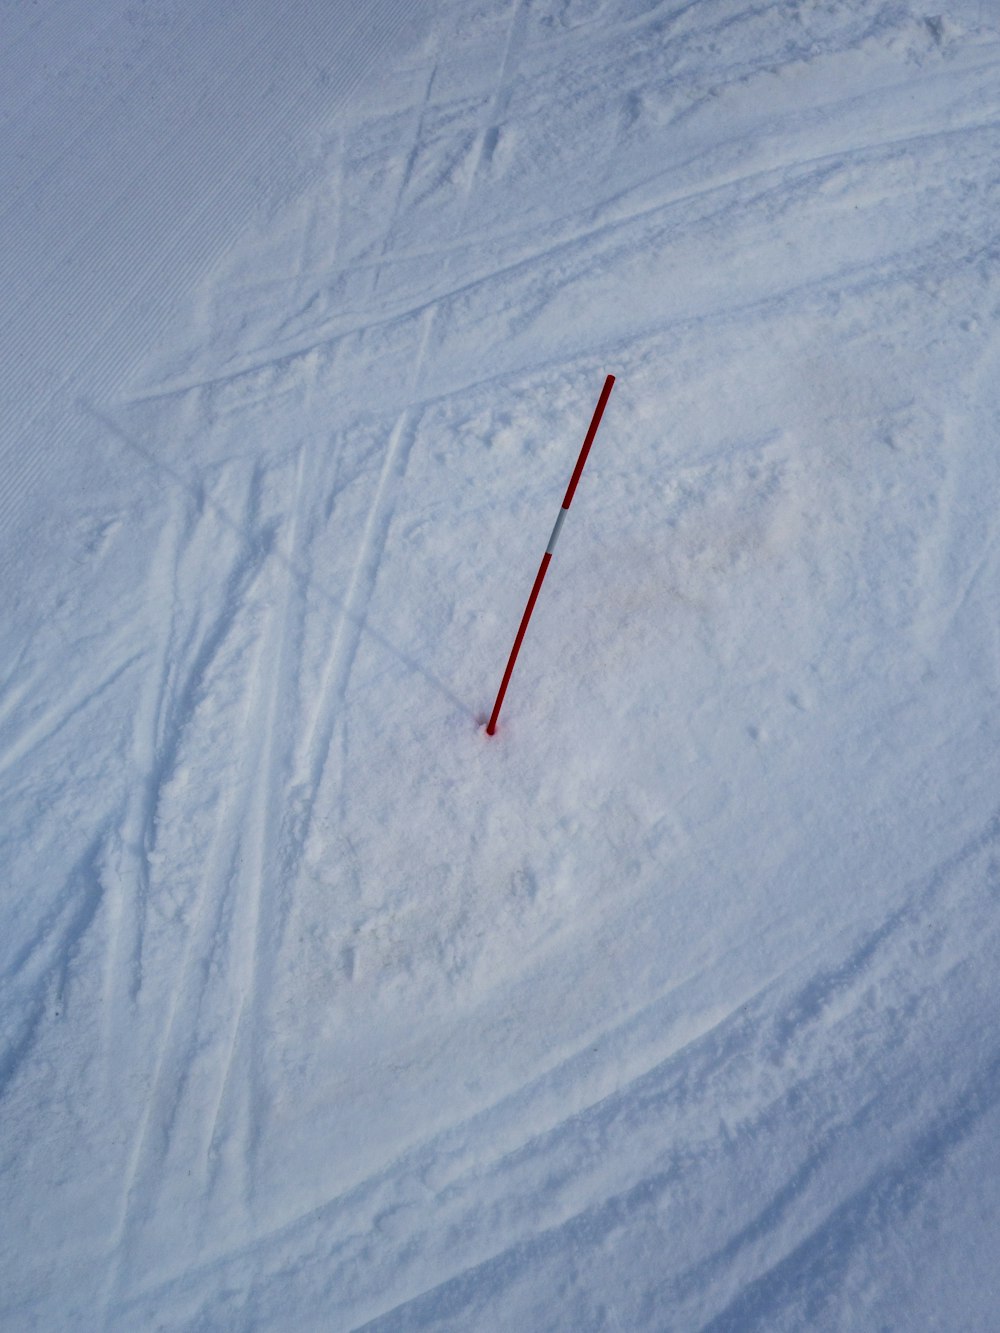 a ski slope with a red pole sticking out of the snow